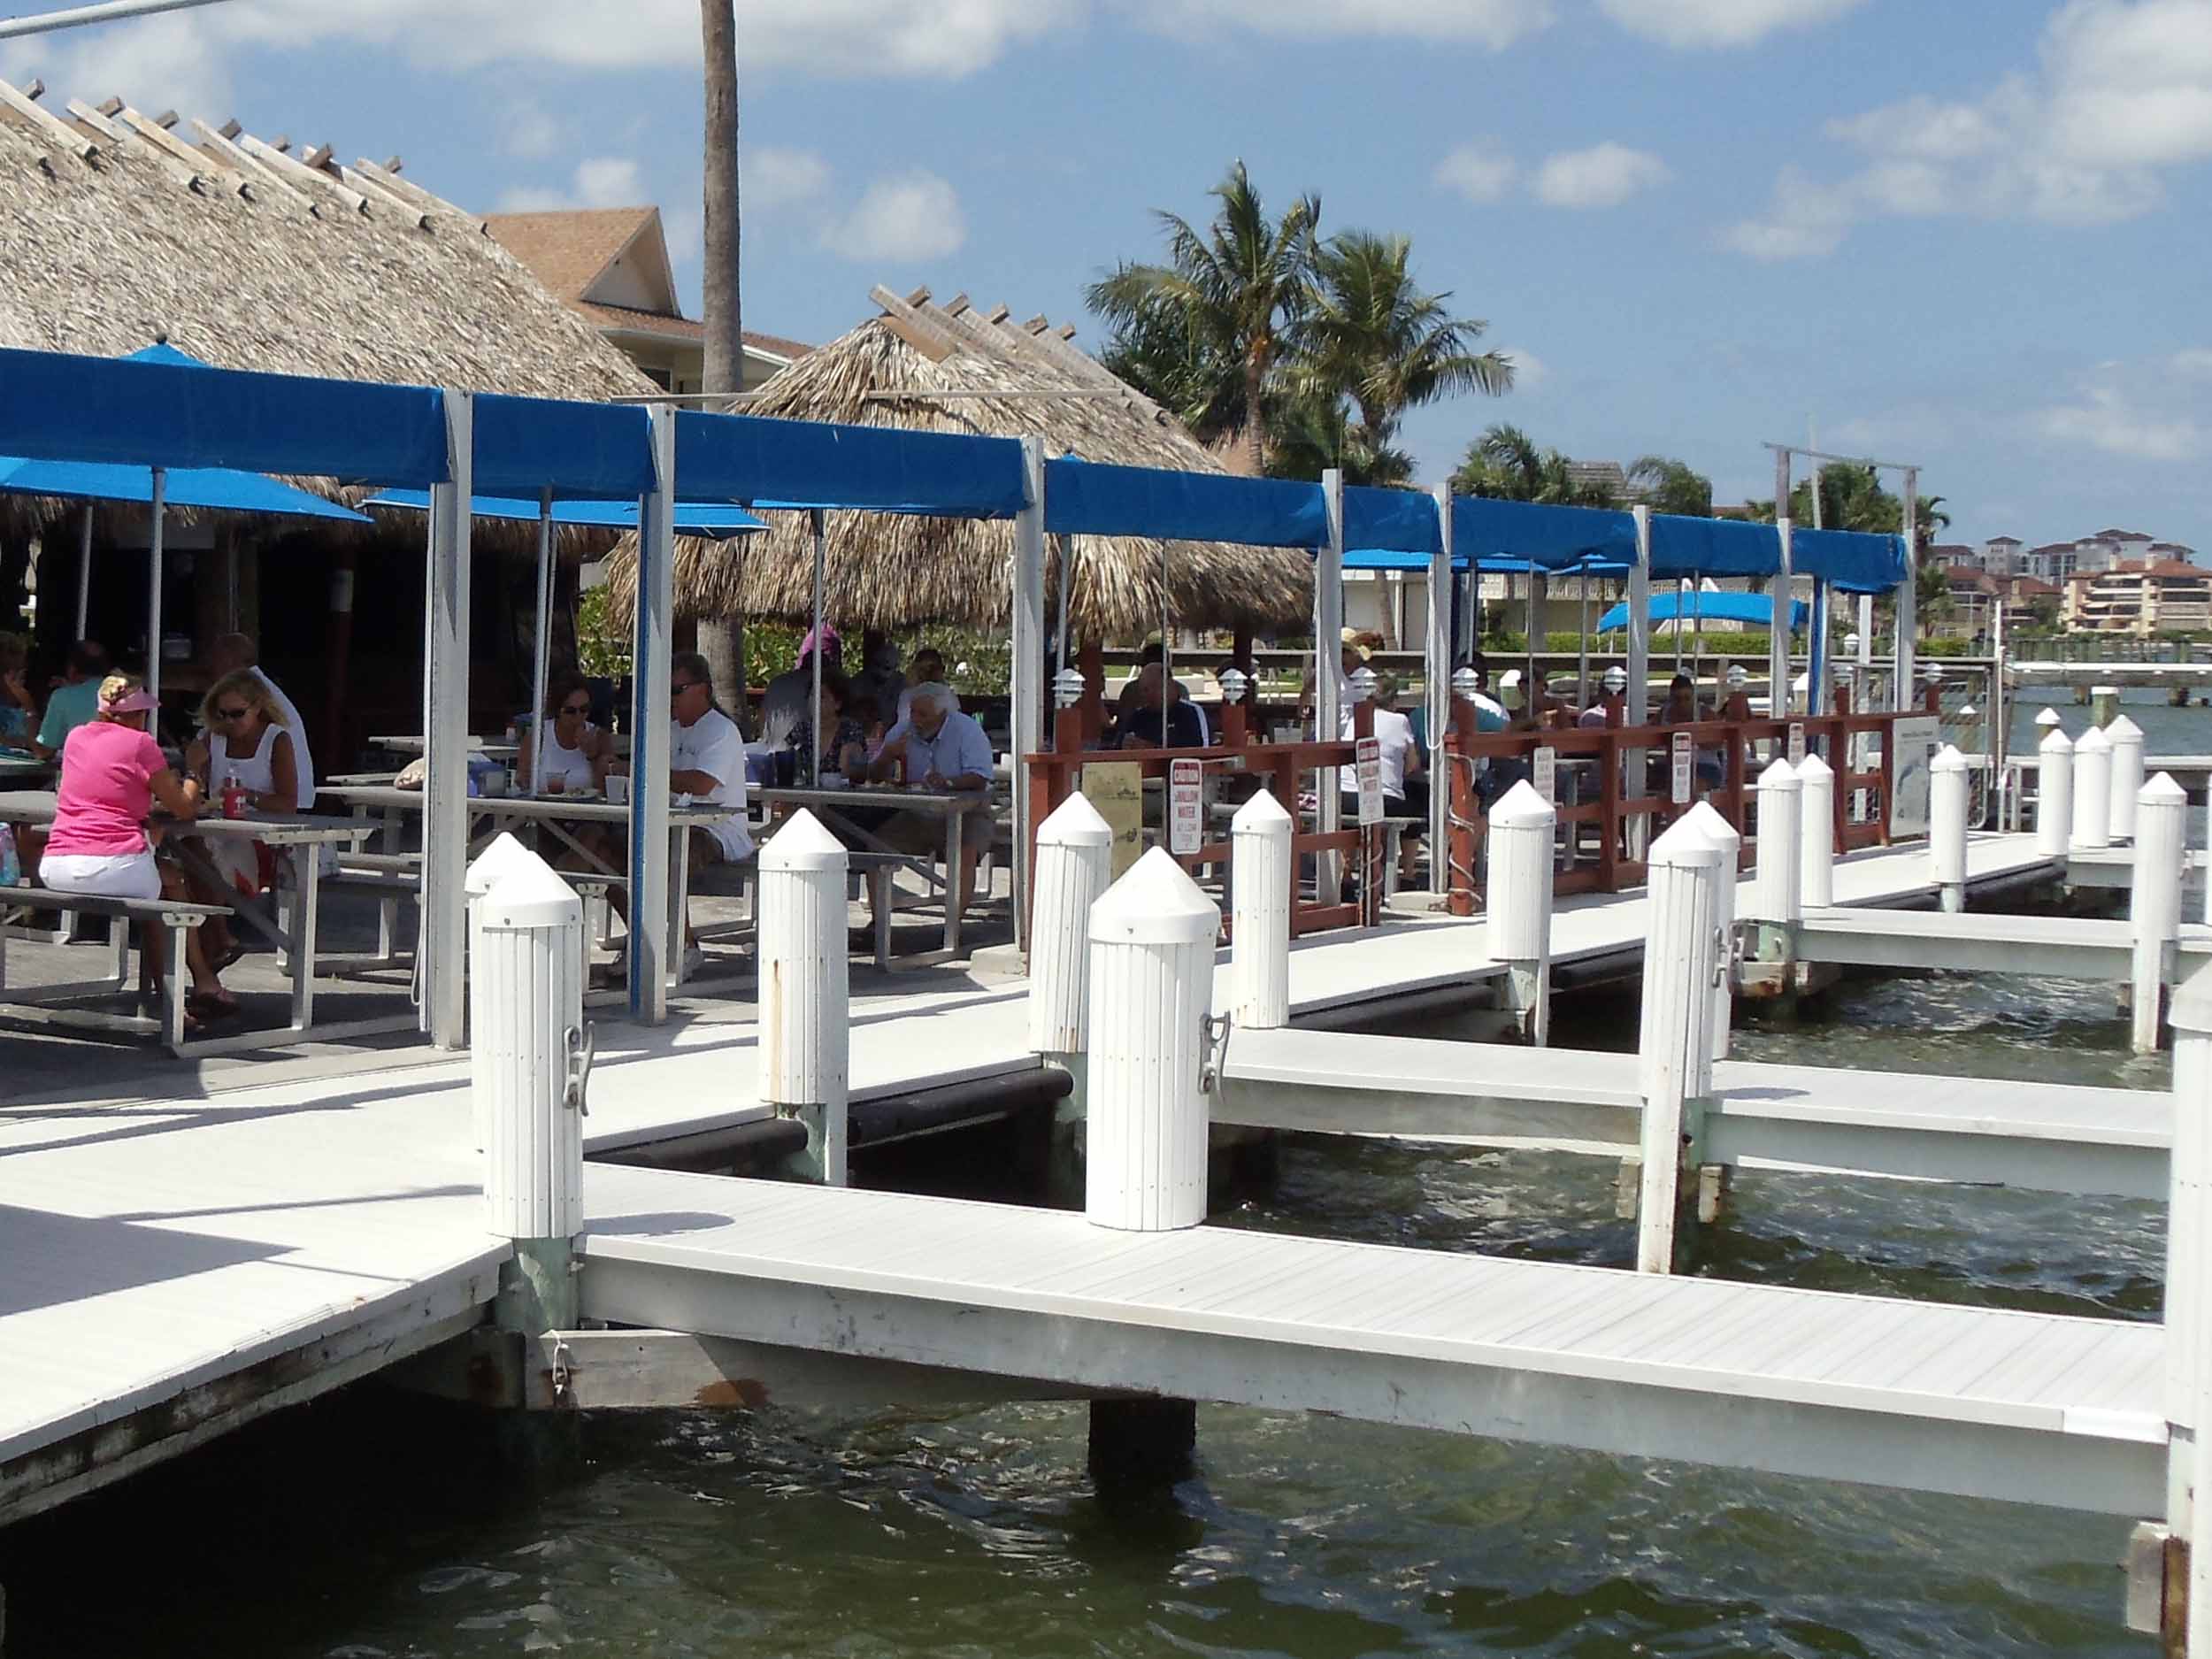 Snook Inn Seating Area and Boat Docks